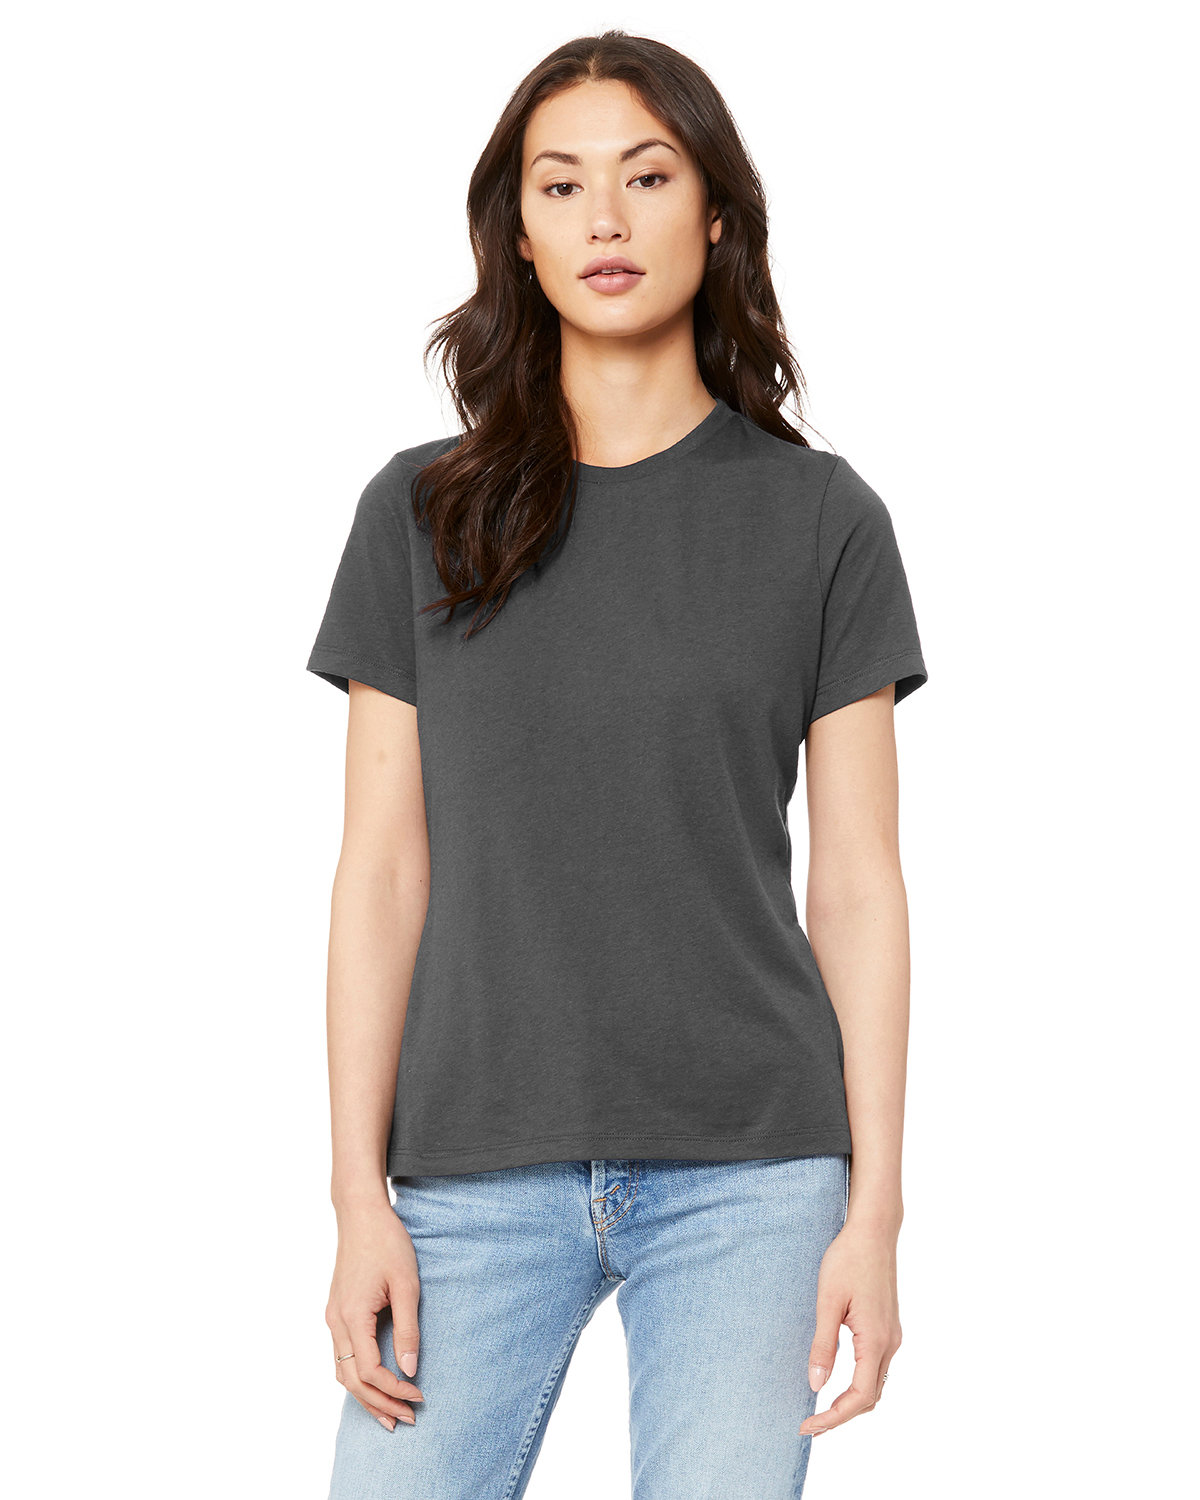 CALIA Women's Everyday Relaxed Fit T-Shirt size large color grey